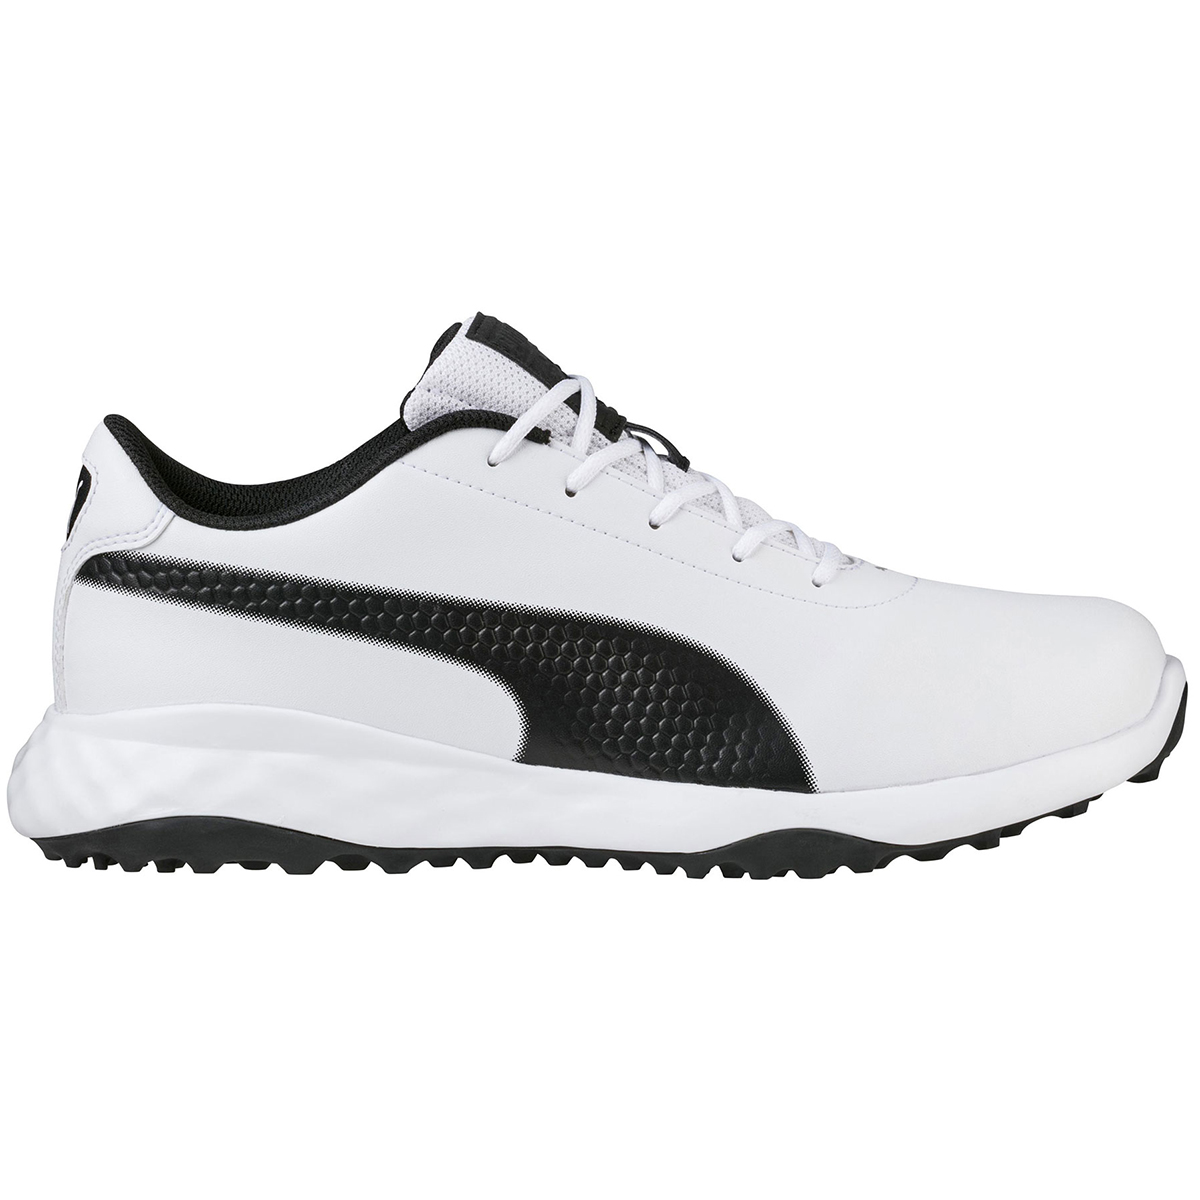 PUMA Golf Grip Fusion Classic Shoes from american golf